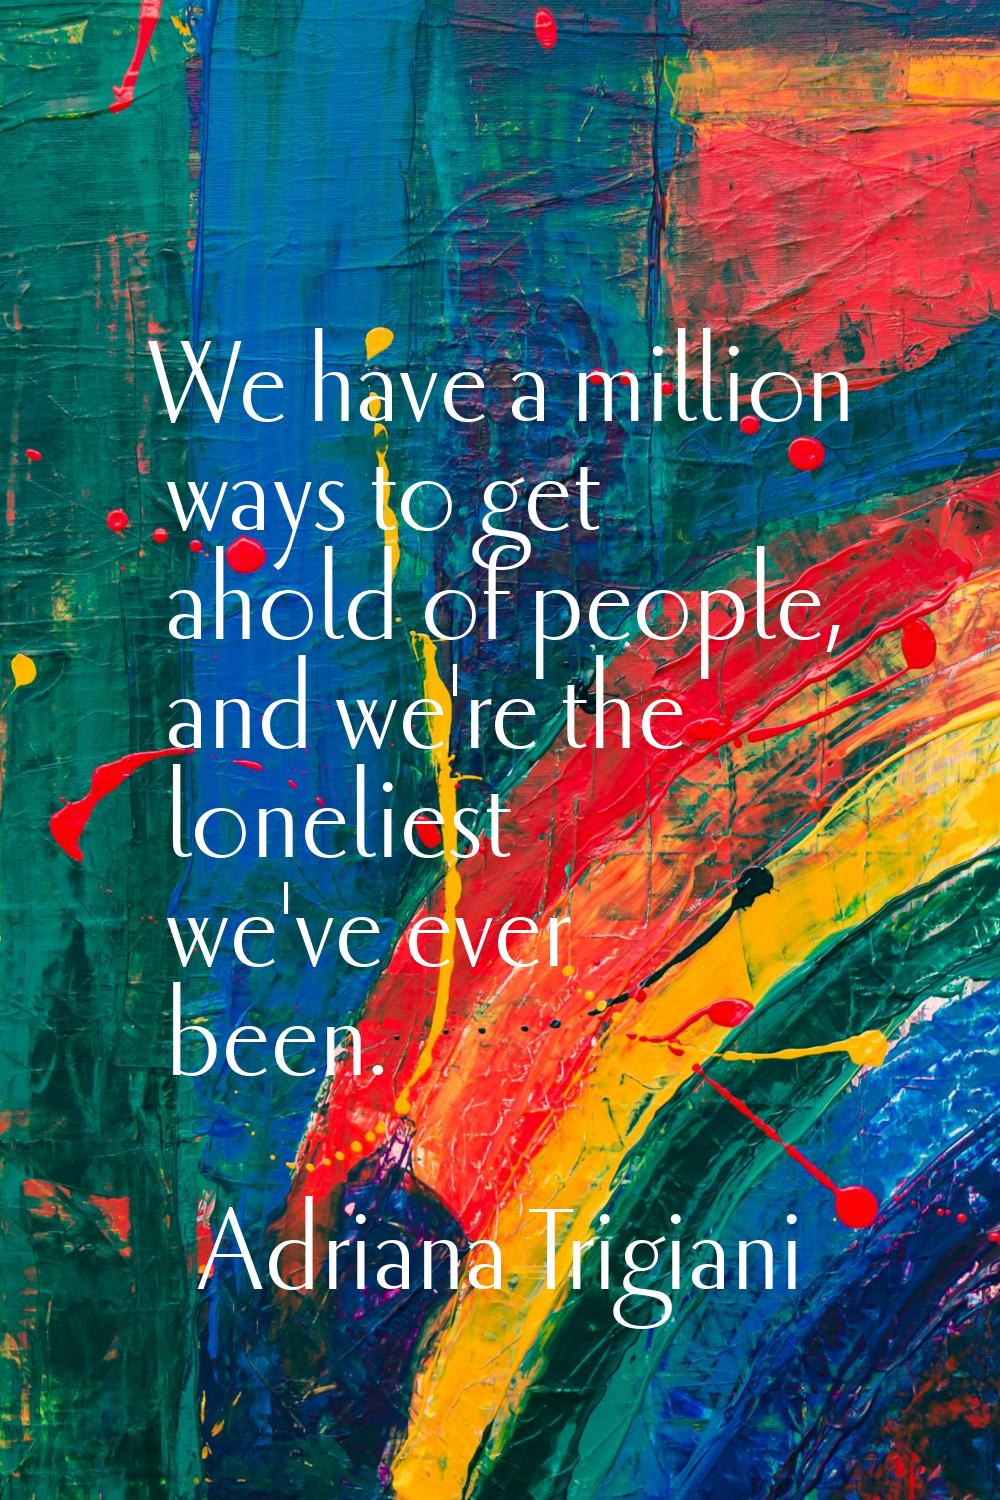 We have a million ways to get ahold of people, and we're the loneliest we've ever been.